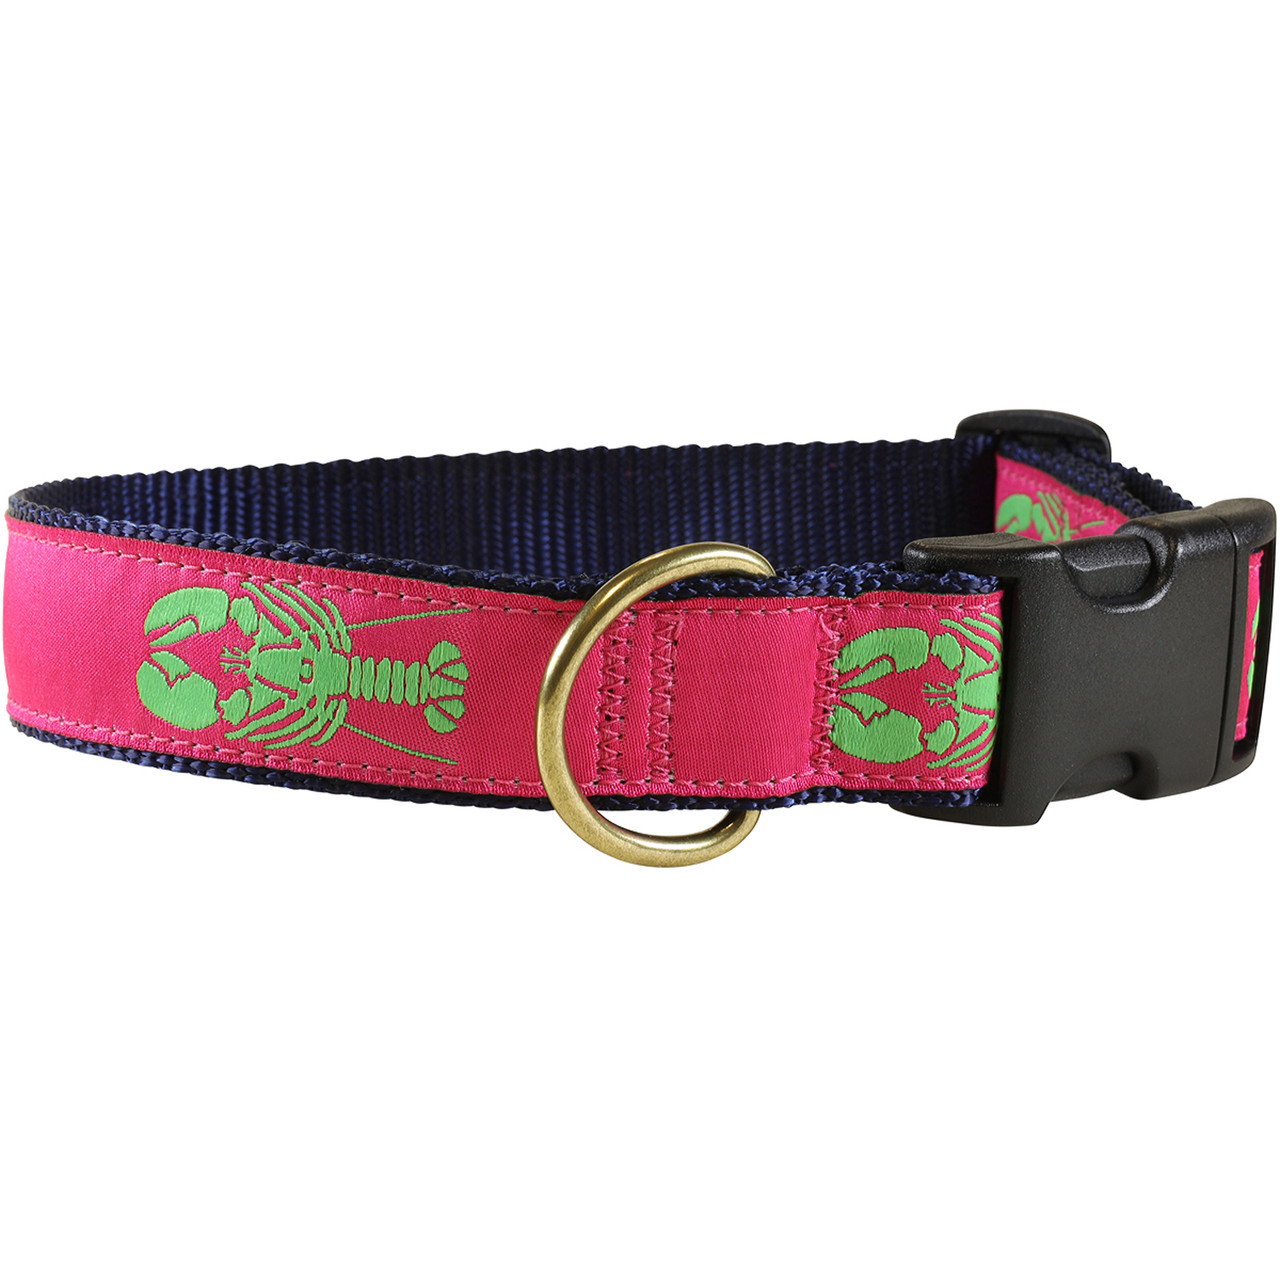 Dog - Underground Fence Collars - Belted Cow Company